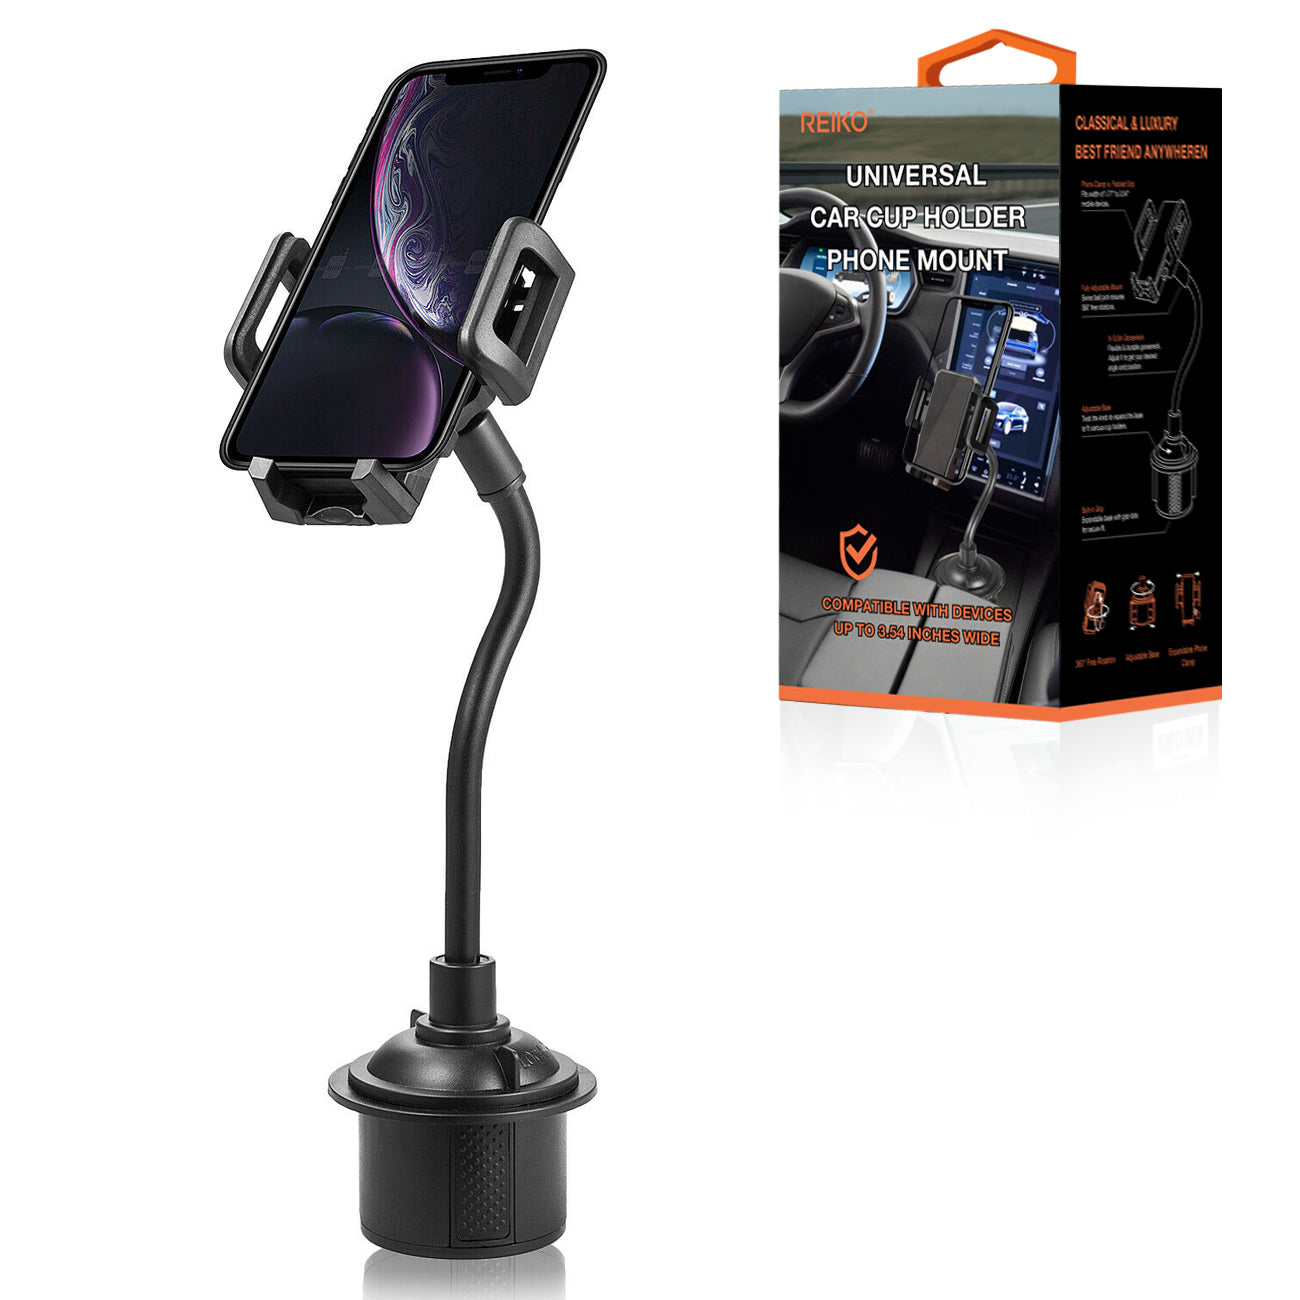 Car Cup Holder Durable Universal Mount Accessories 360° Adjustable For Mobile Phones Or GPS Black Color